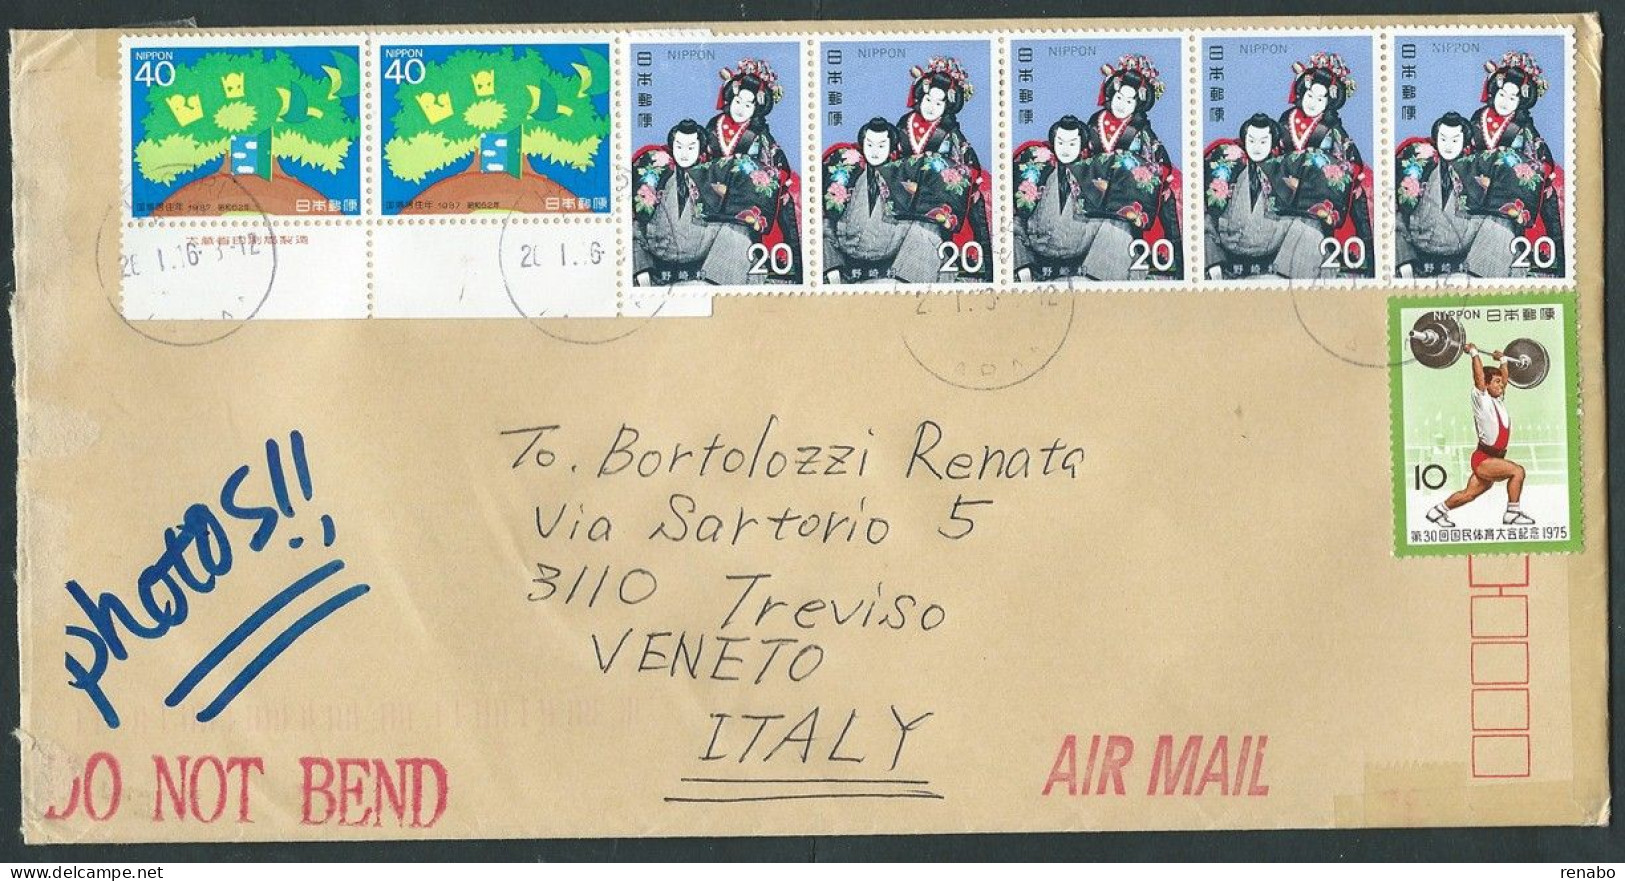 Japan, Japon, Giappone 2016; National Bunraku Theater + Others. Air-mail Post To Italy. - Covers & Documents